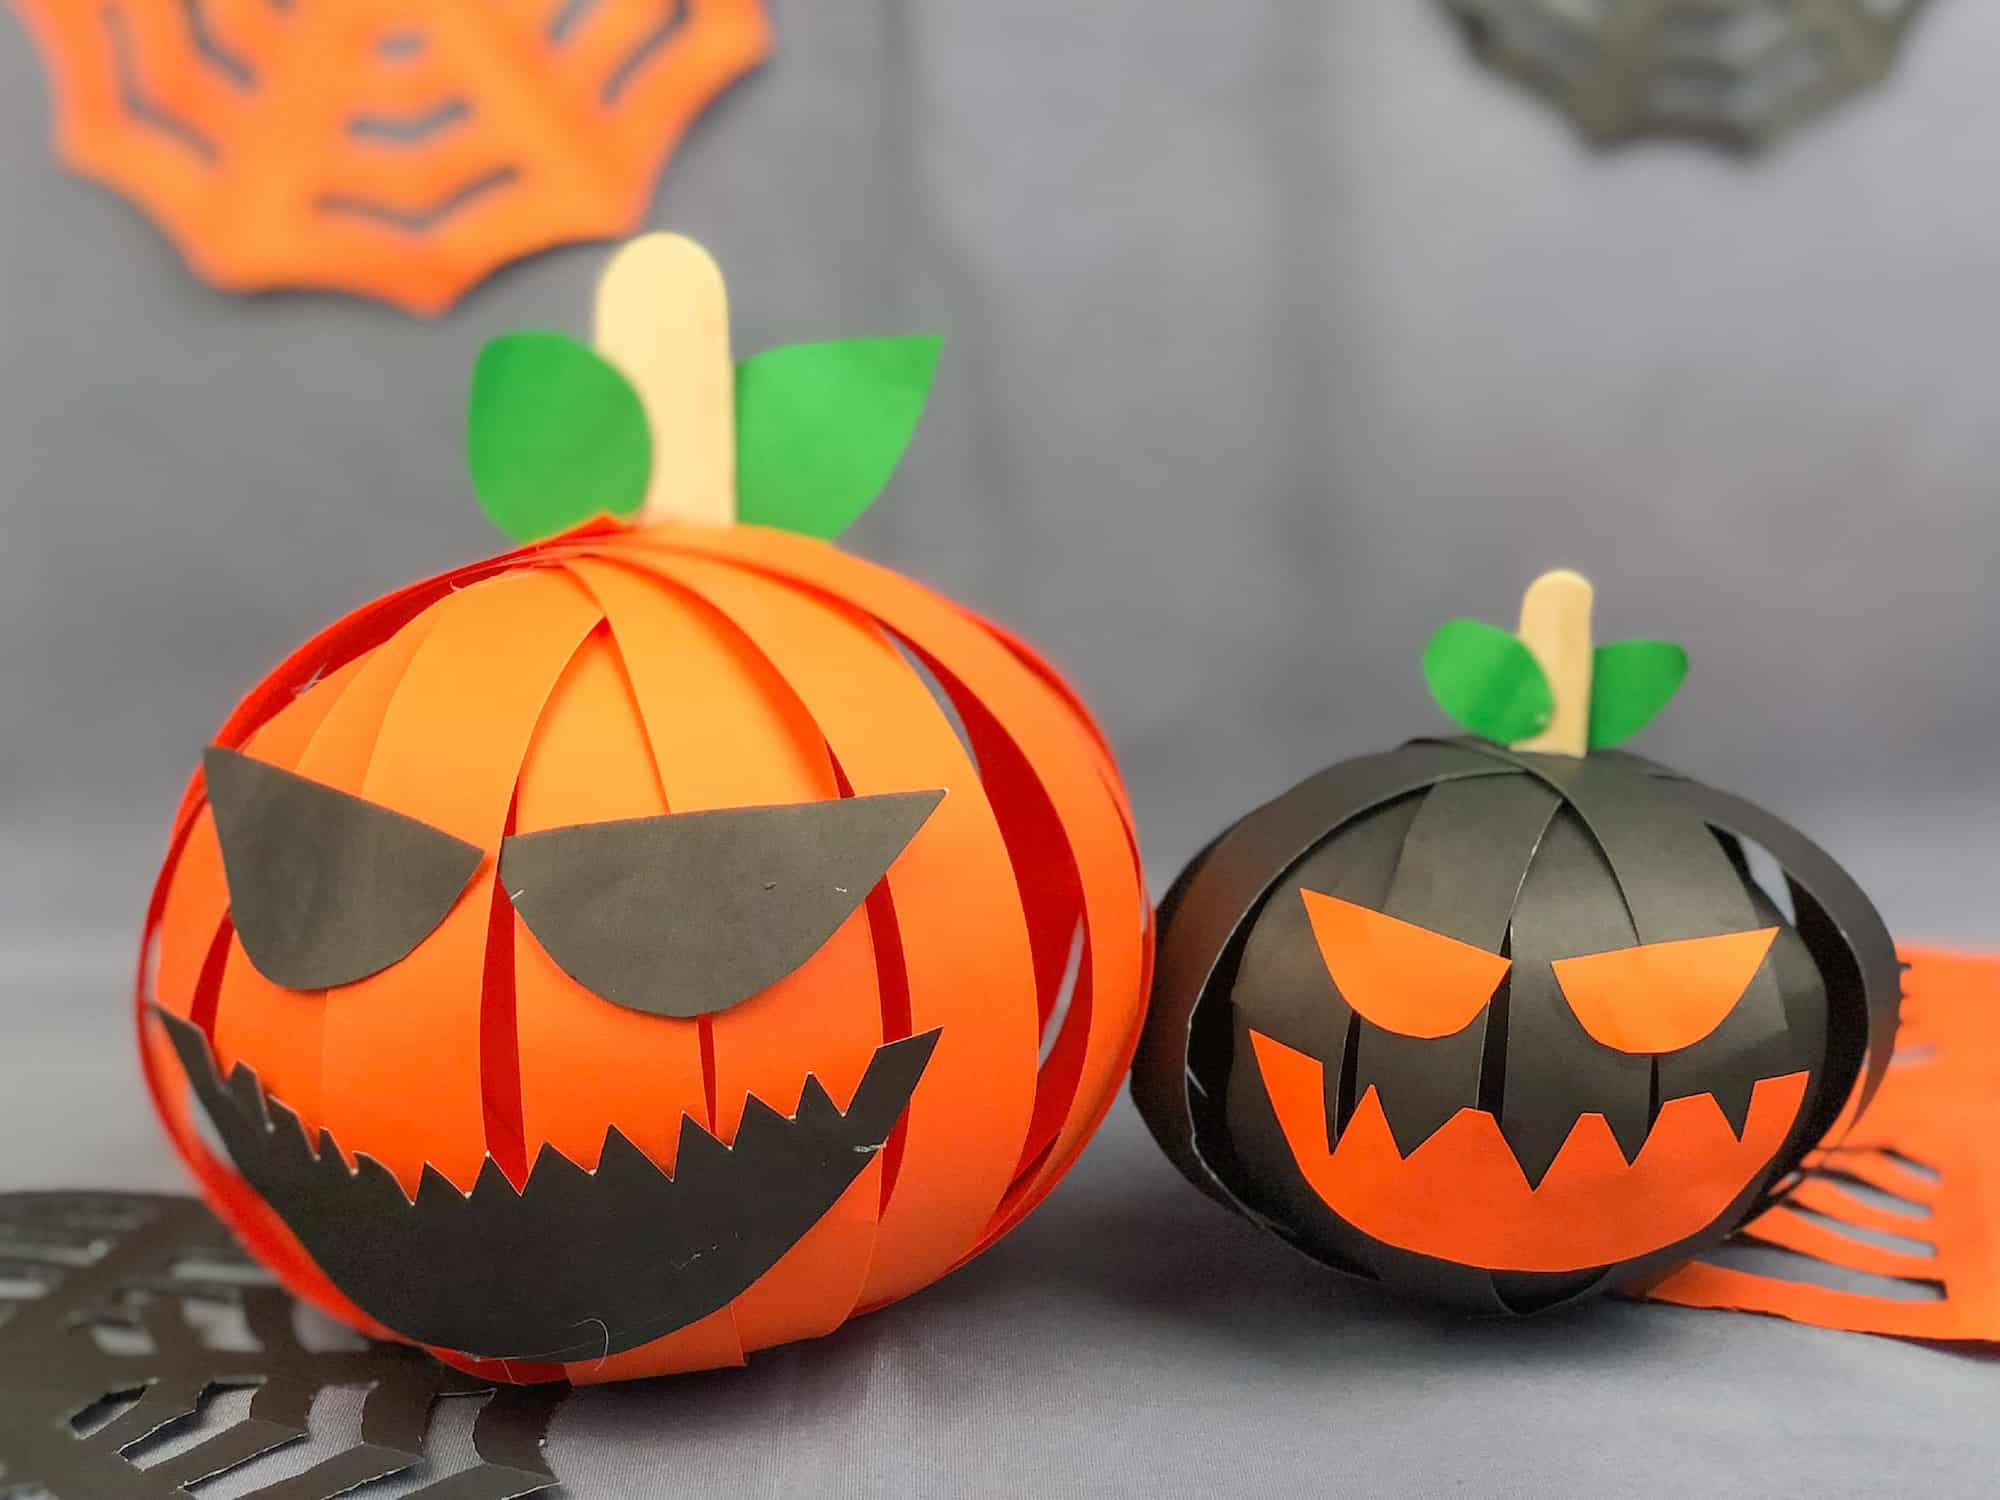 papercraft pumpkin with additional decorations with a mischievous face